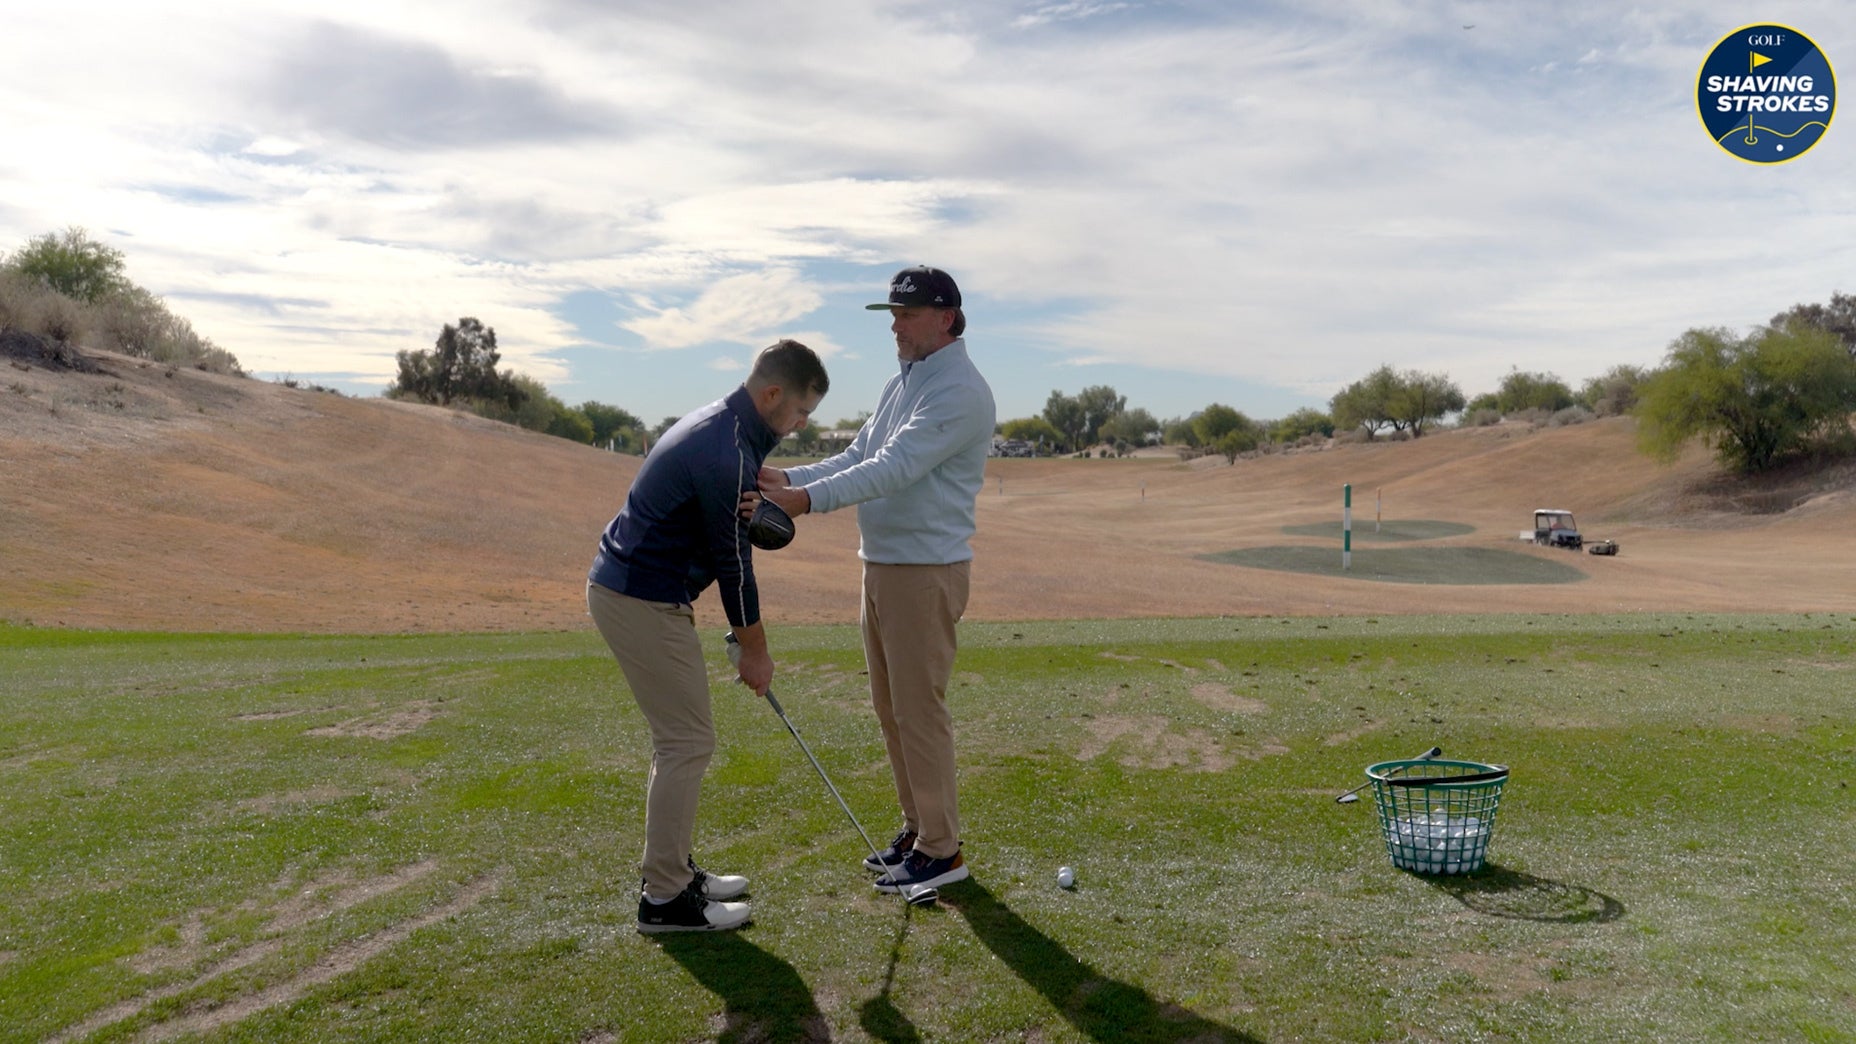 To dial in approach shots from 75-100 yards, GOLF Top 100 Teacher Joe Plecker says to rethink ball position and how to use the club's loft